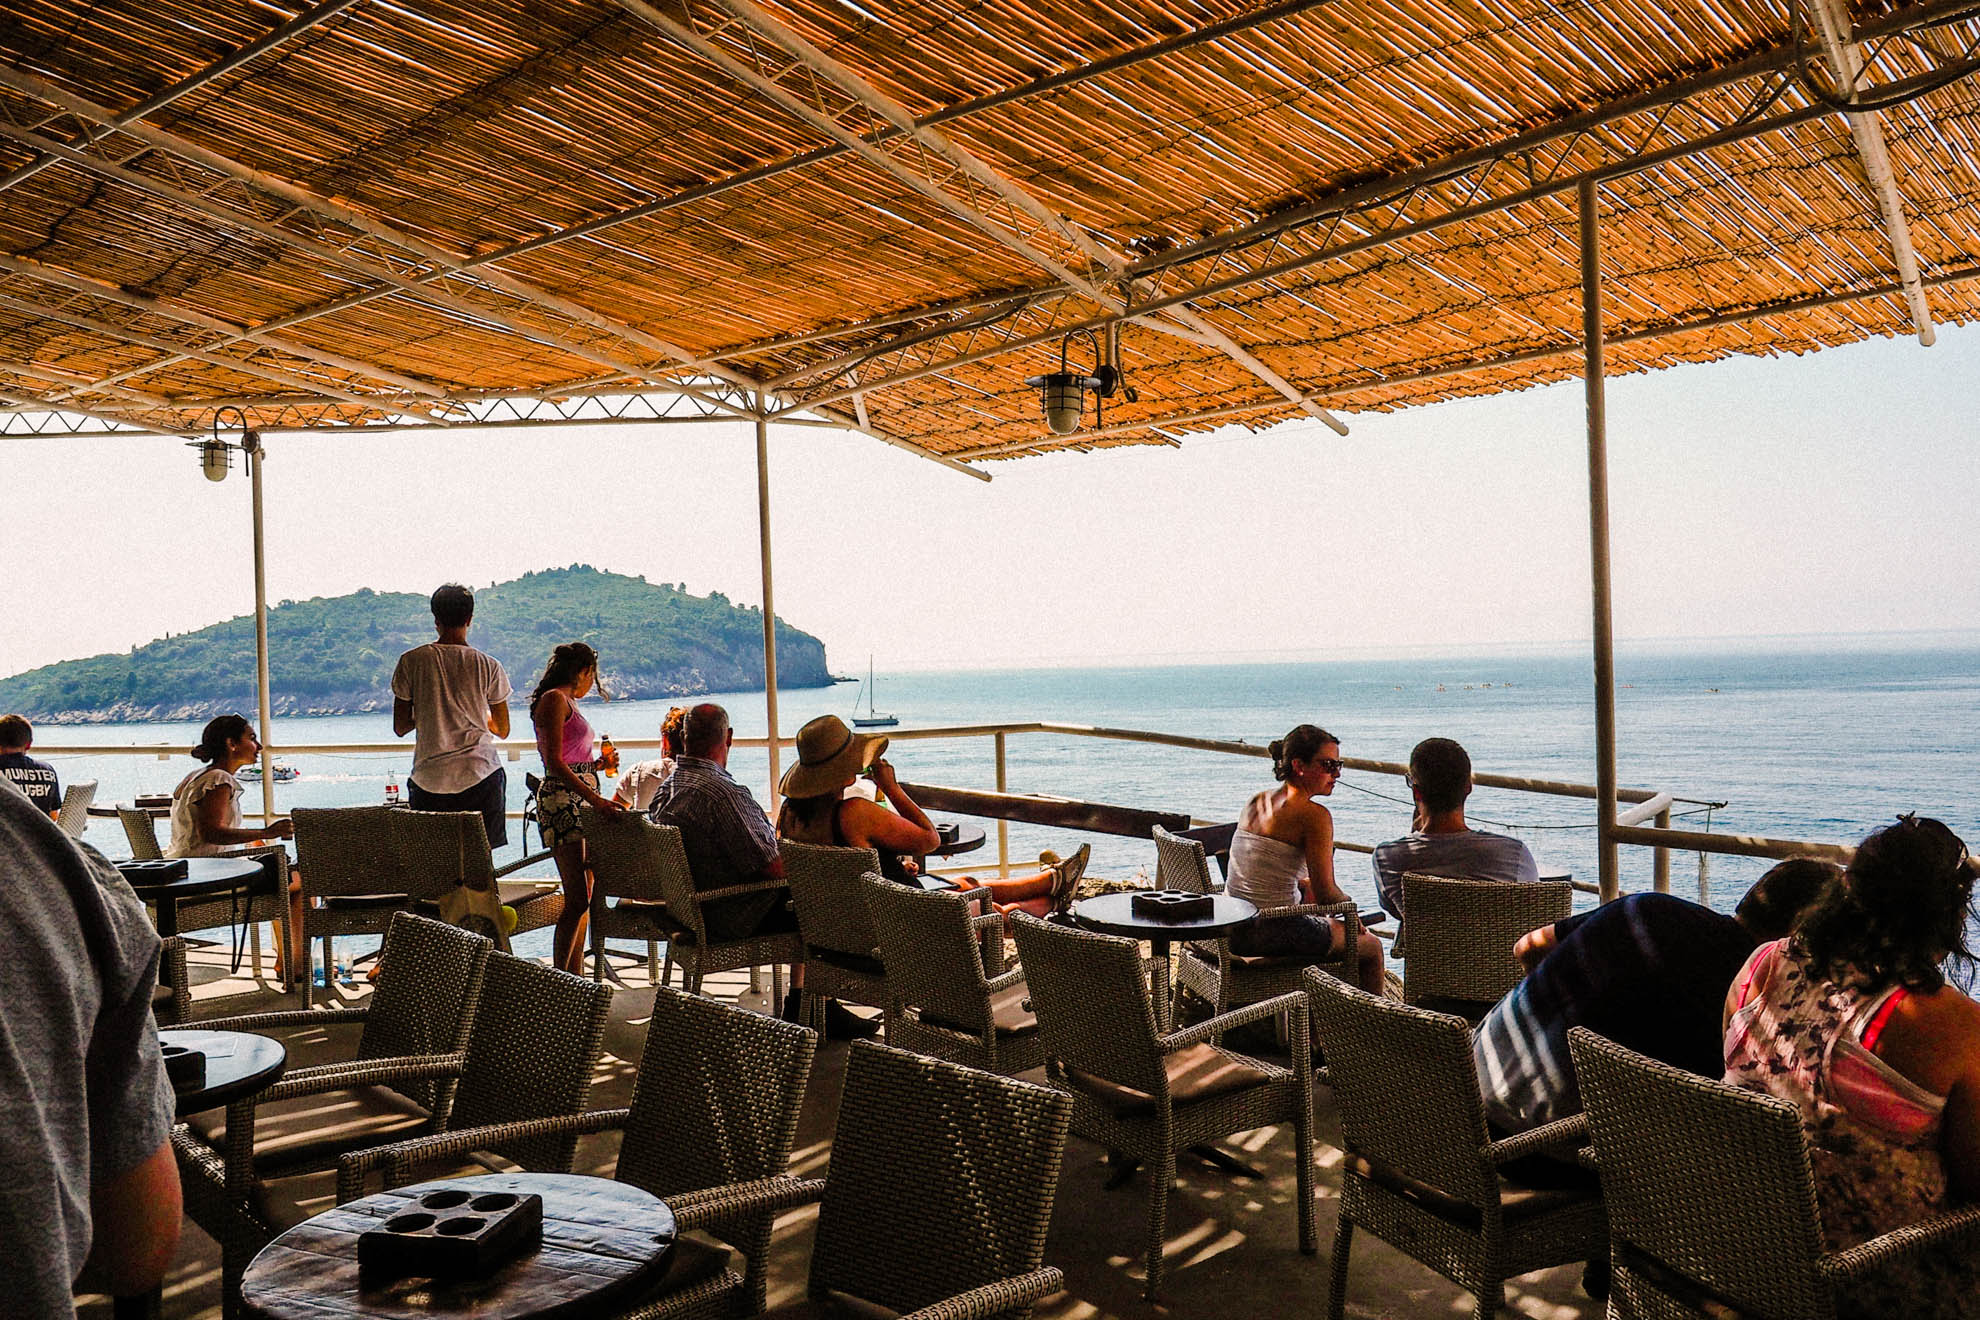 The Best Restaurants in Dubrovnik, Croatia: Where to Eat and Drink in Dubrovnik